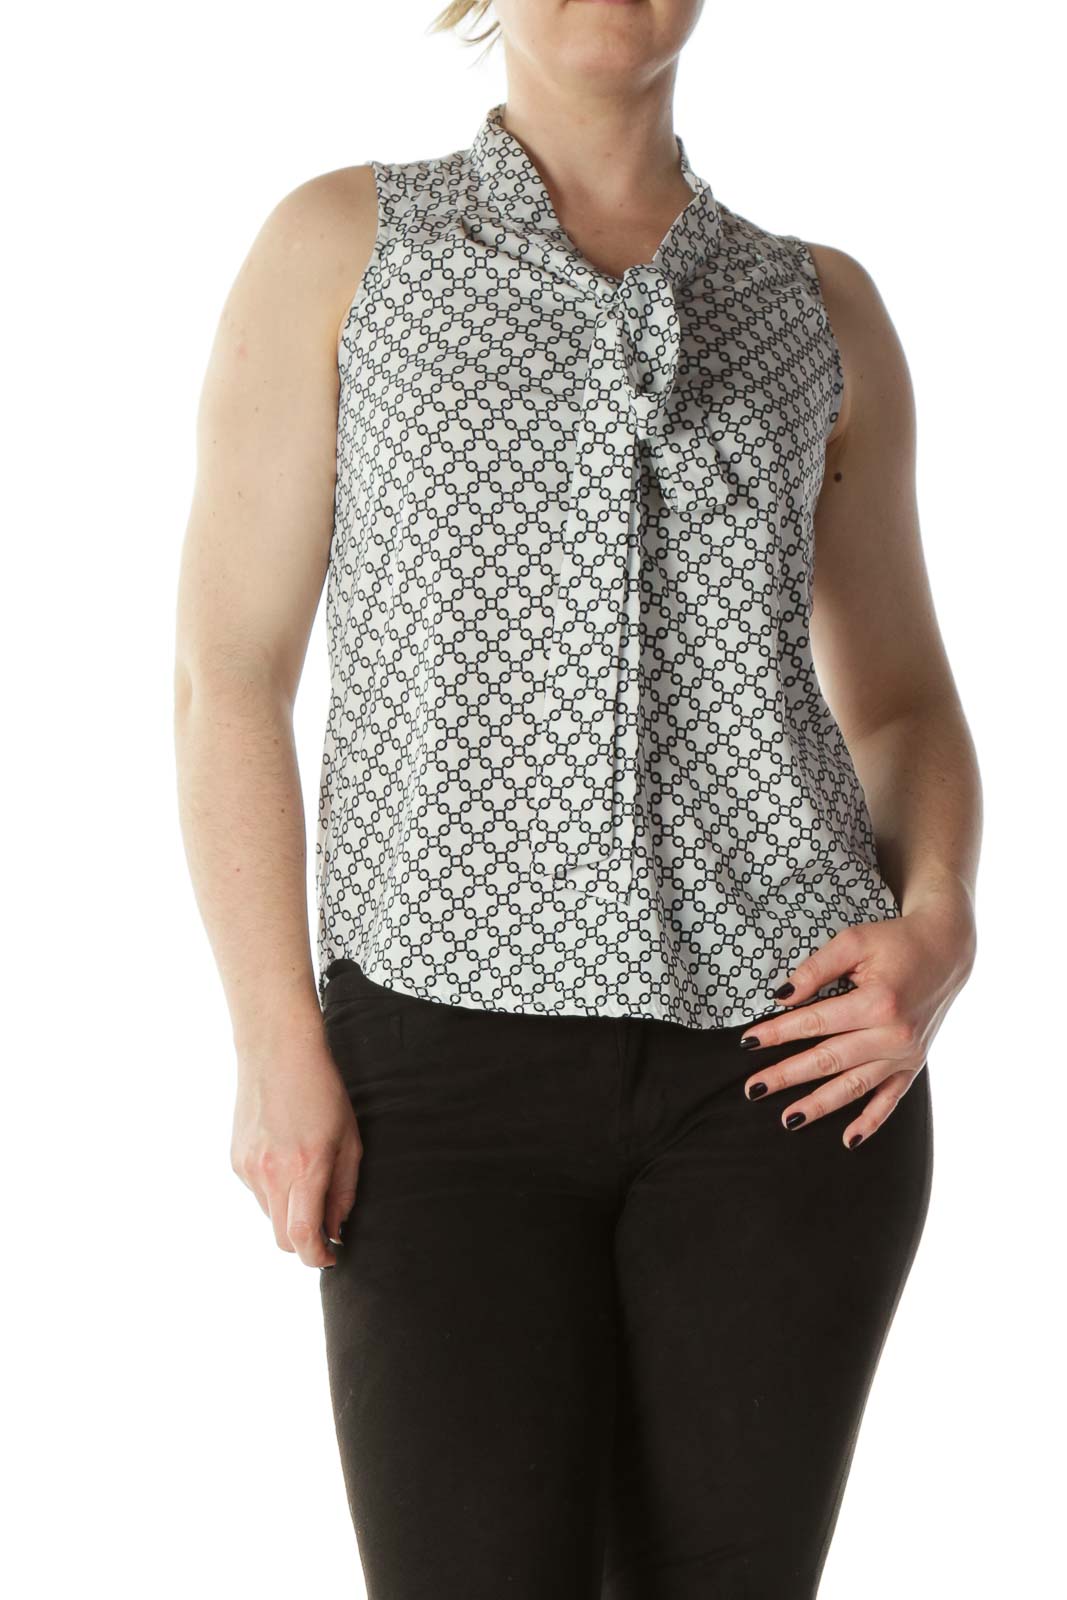 White and Black Chain Patterned Sleeveless Blouse with Neck-Tie Front